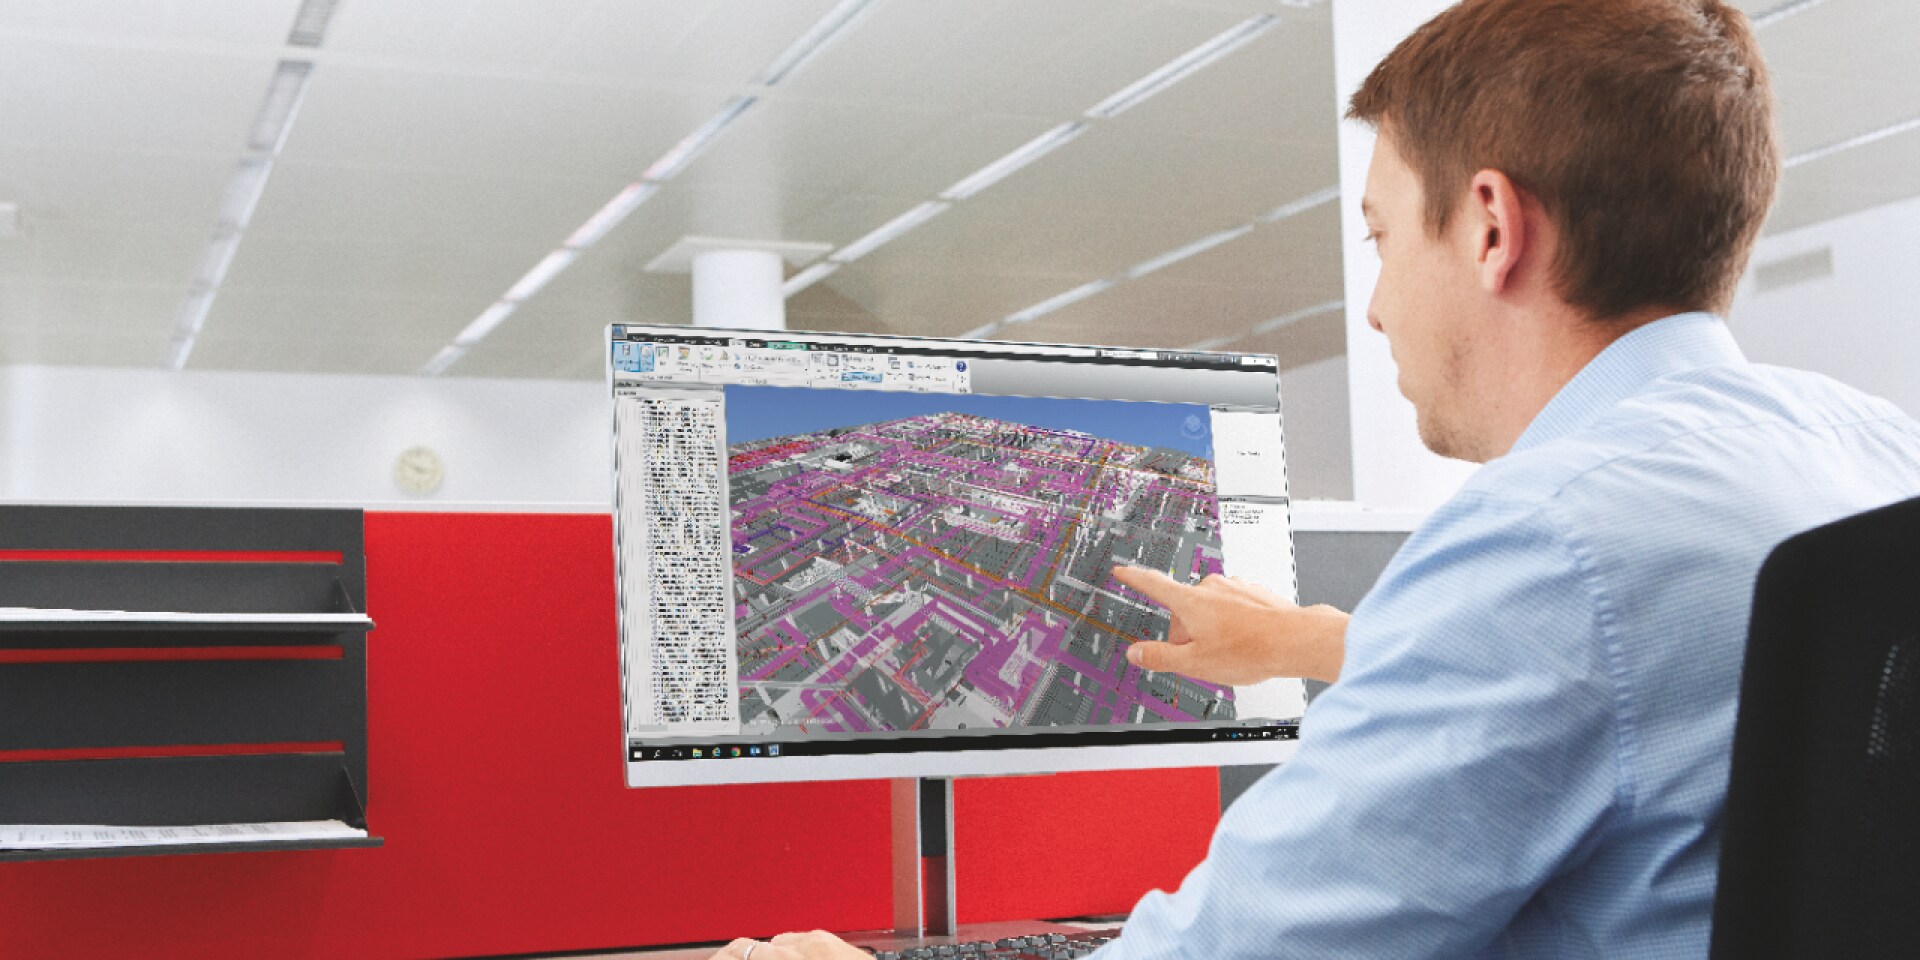 Architect, engineer or project manager using BIM (building information modeling) due to tech integration in construction